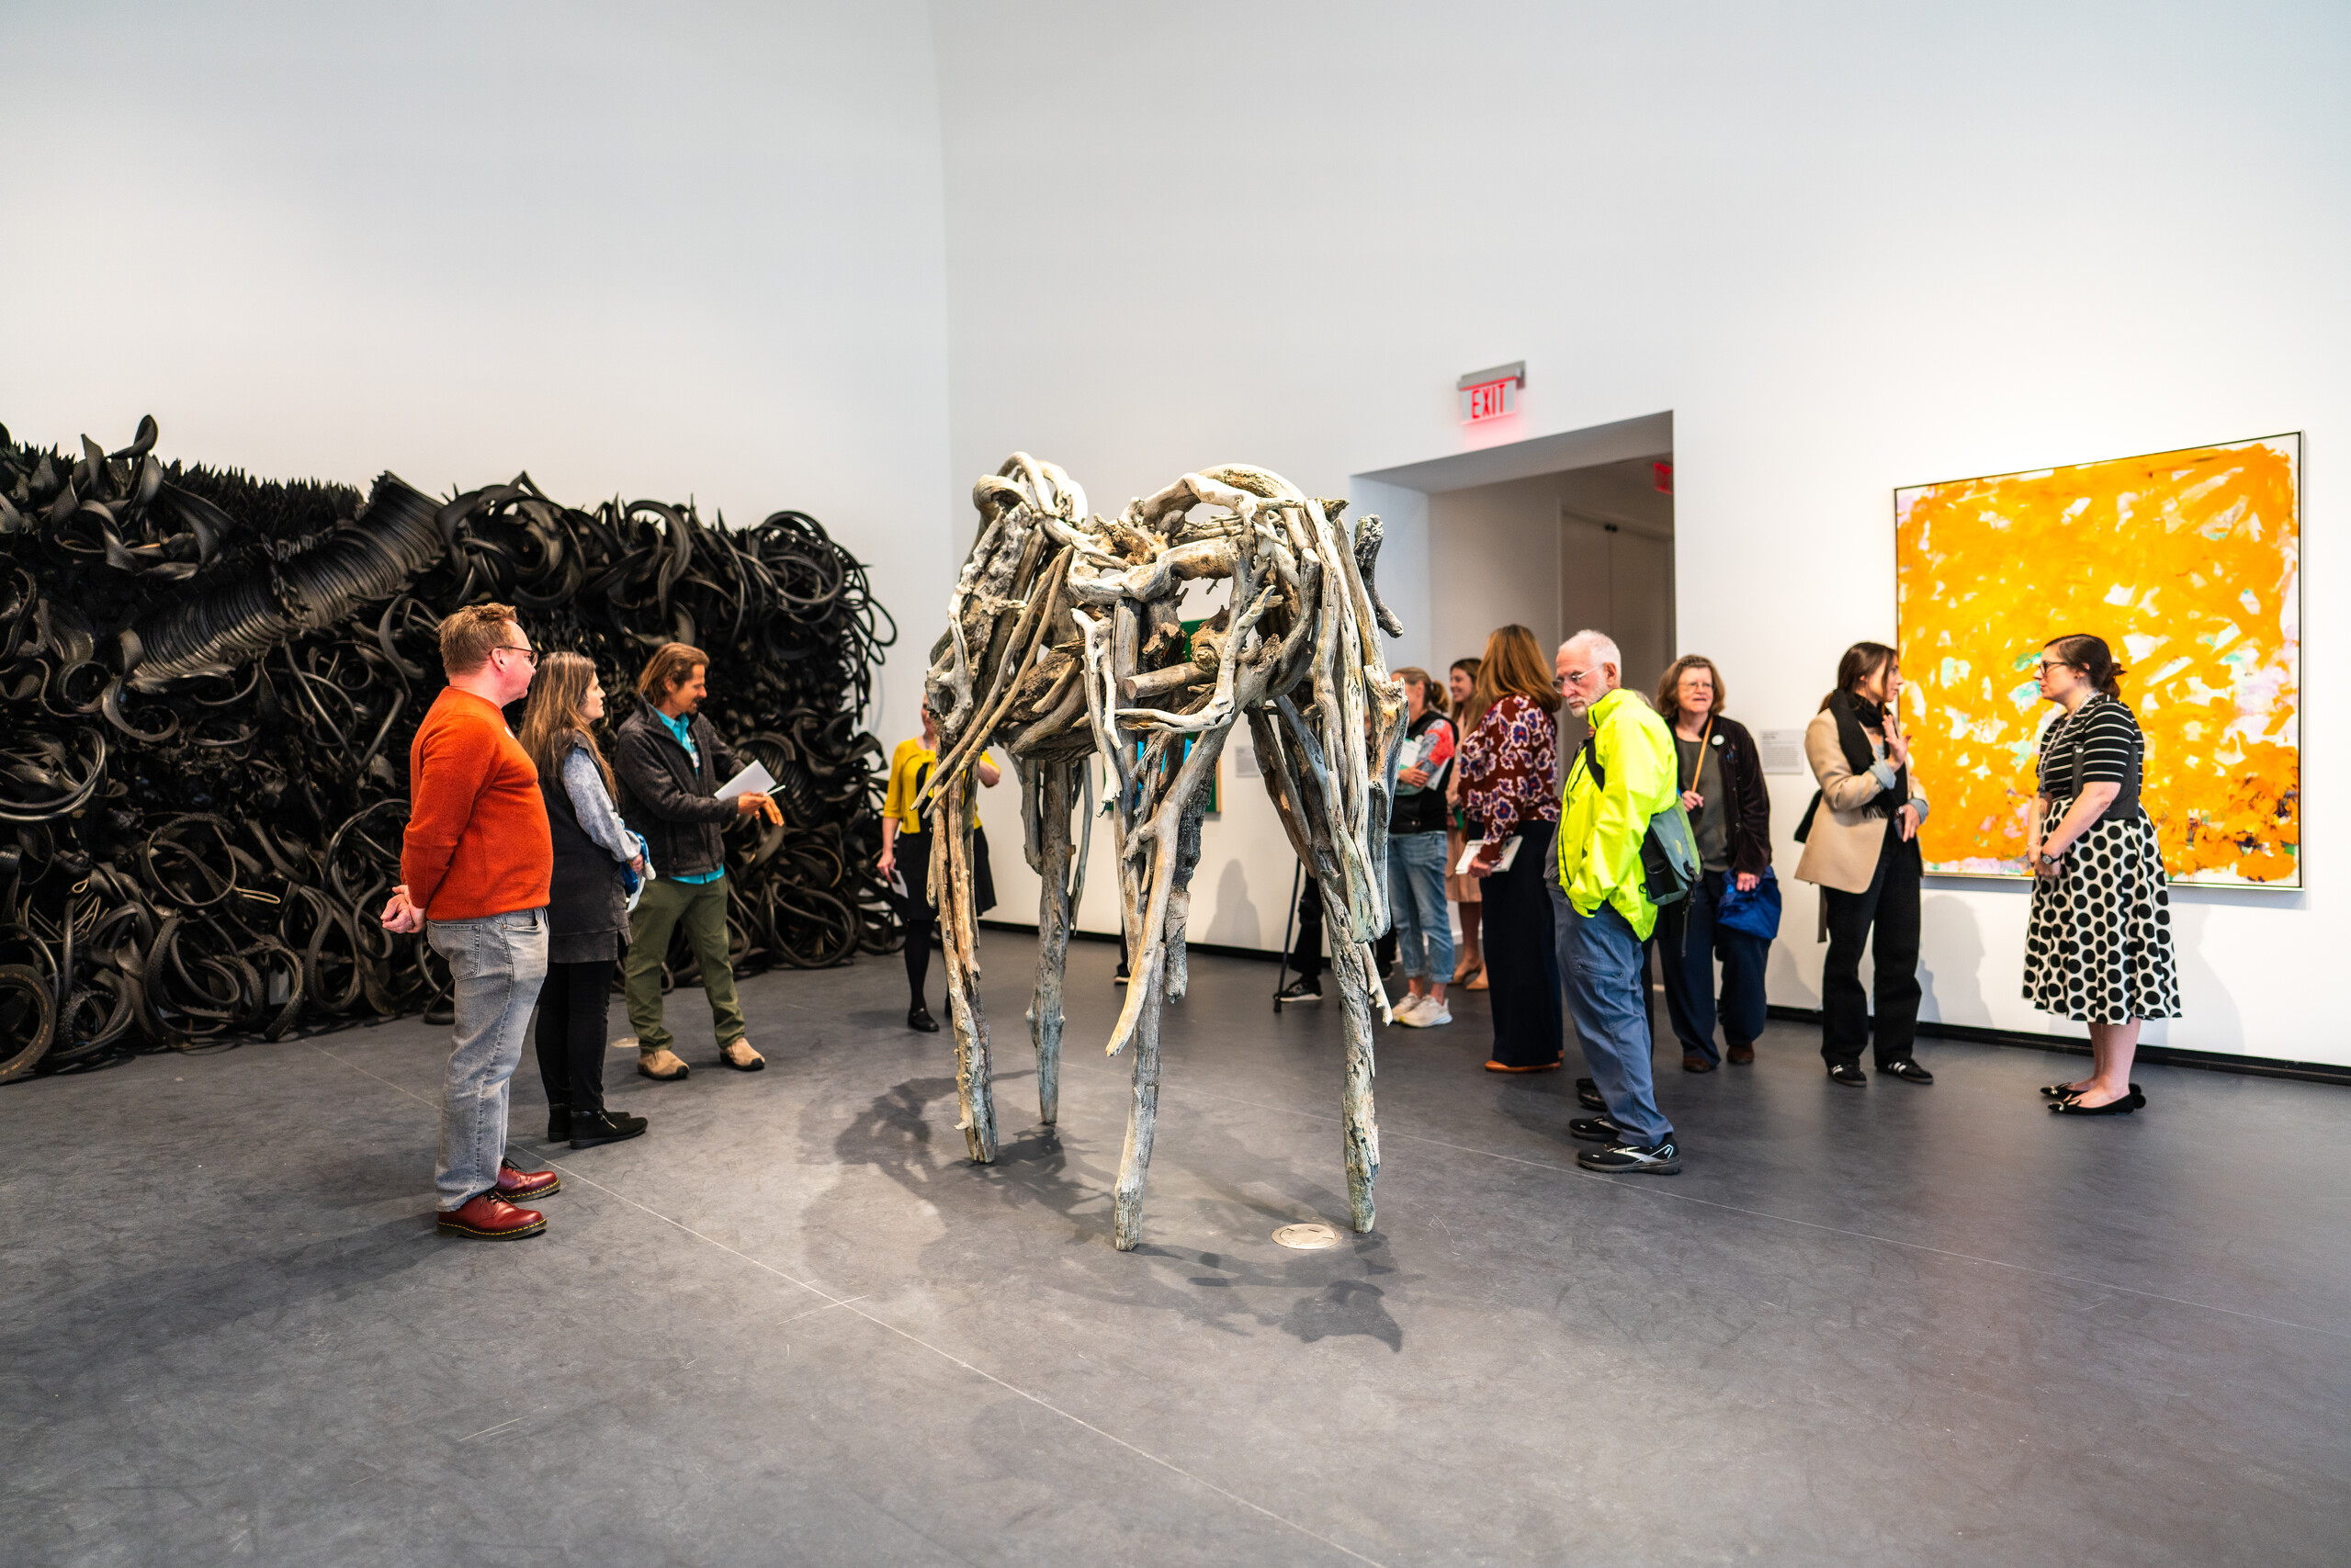 View of a gallery. Several people are standing in the space, viewing the artworks. A large, yellow painting hangs on the right wall, an even bigger sculpture made of rubber tires is on the left wall, and a sculpture made of branches stands in the middle of the room.